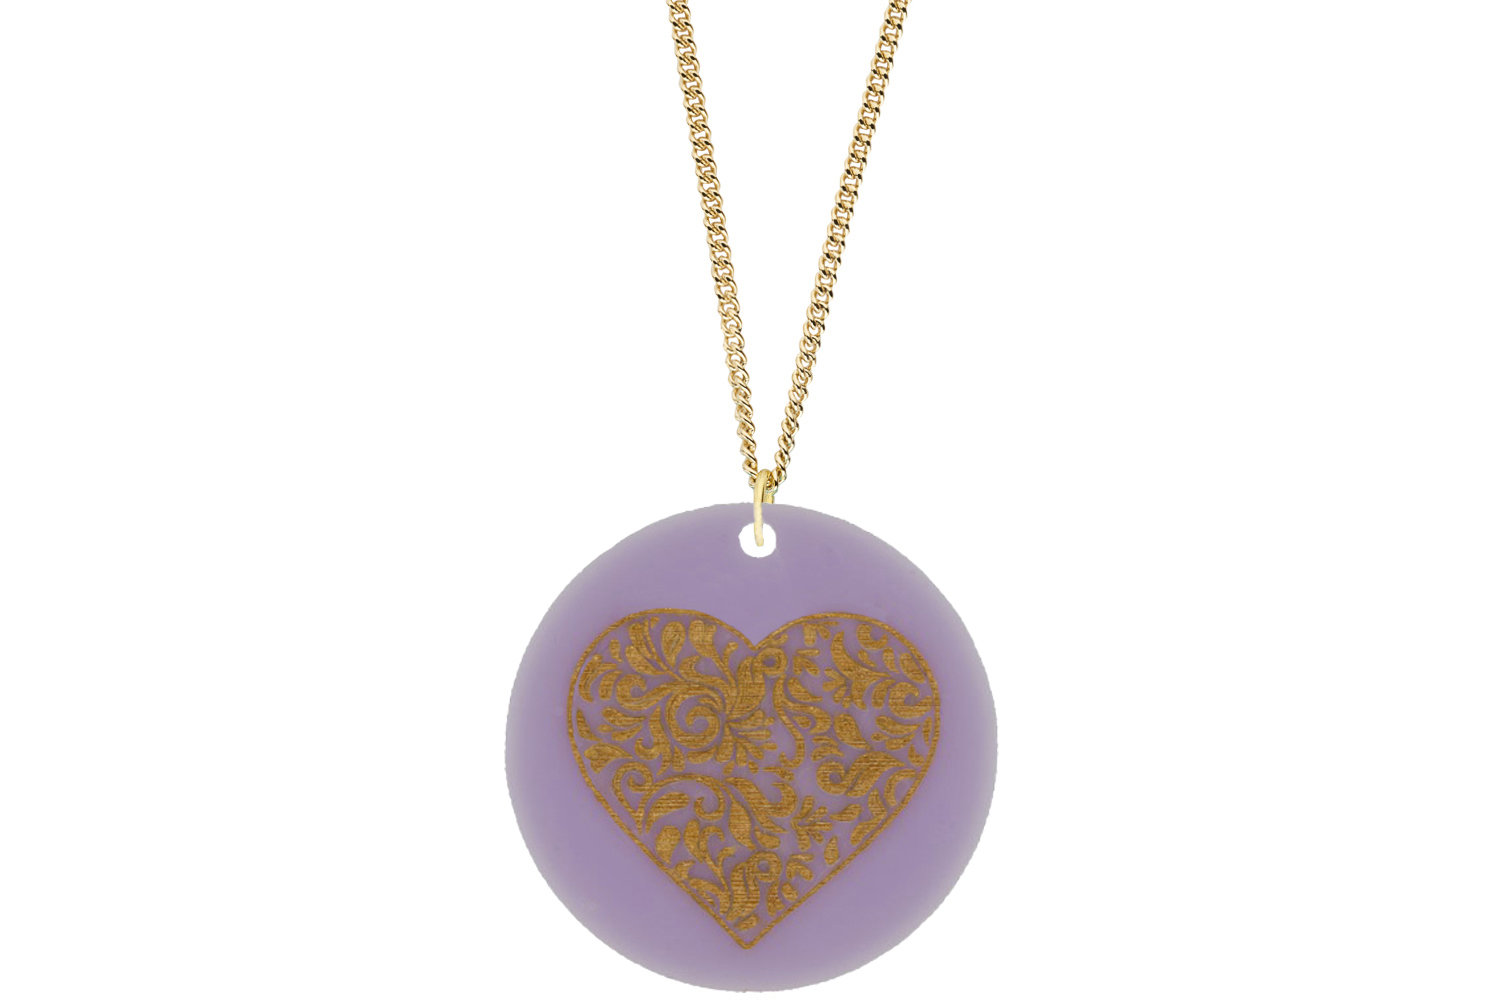 Heart Scroll Pendant Subtle Style Refined with Paint on Chain Necklace